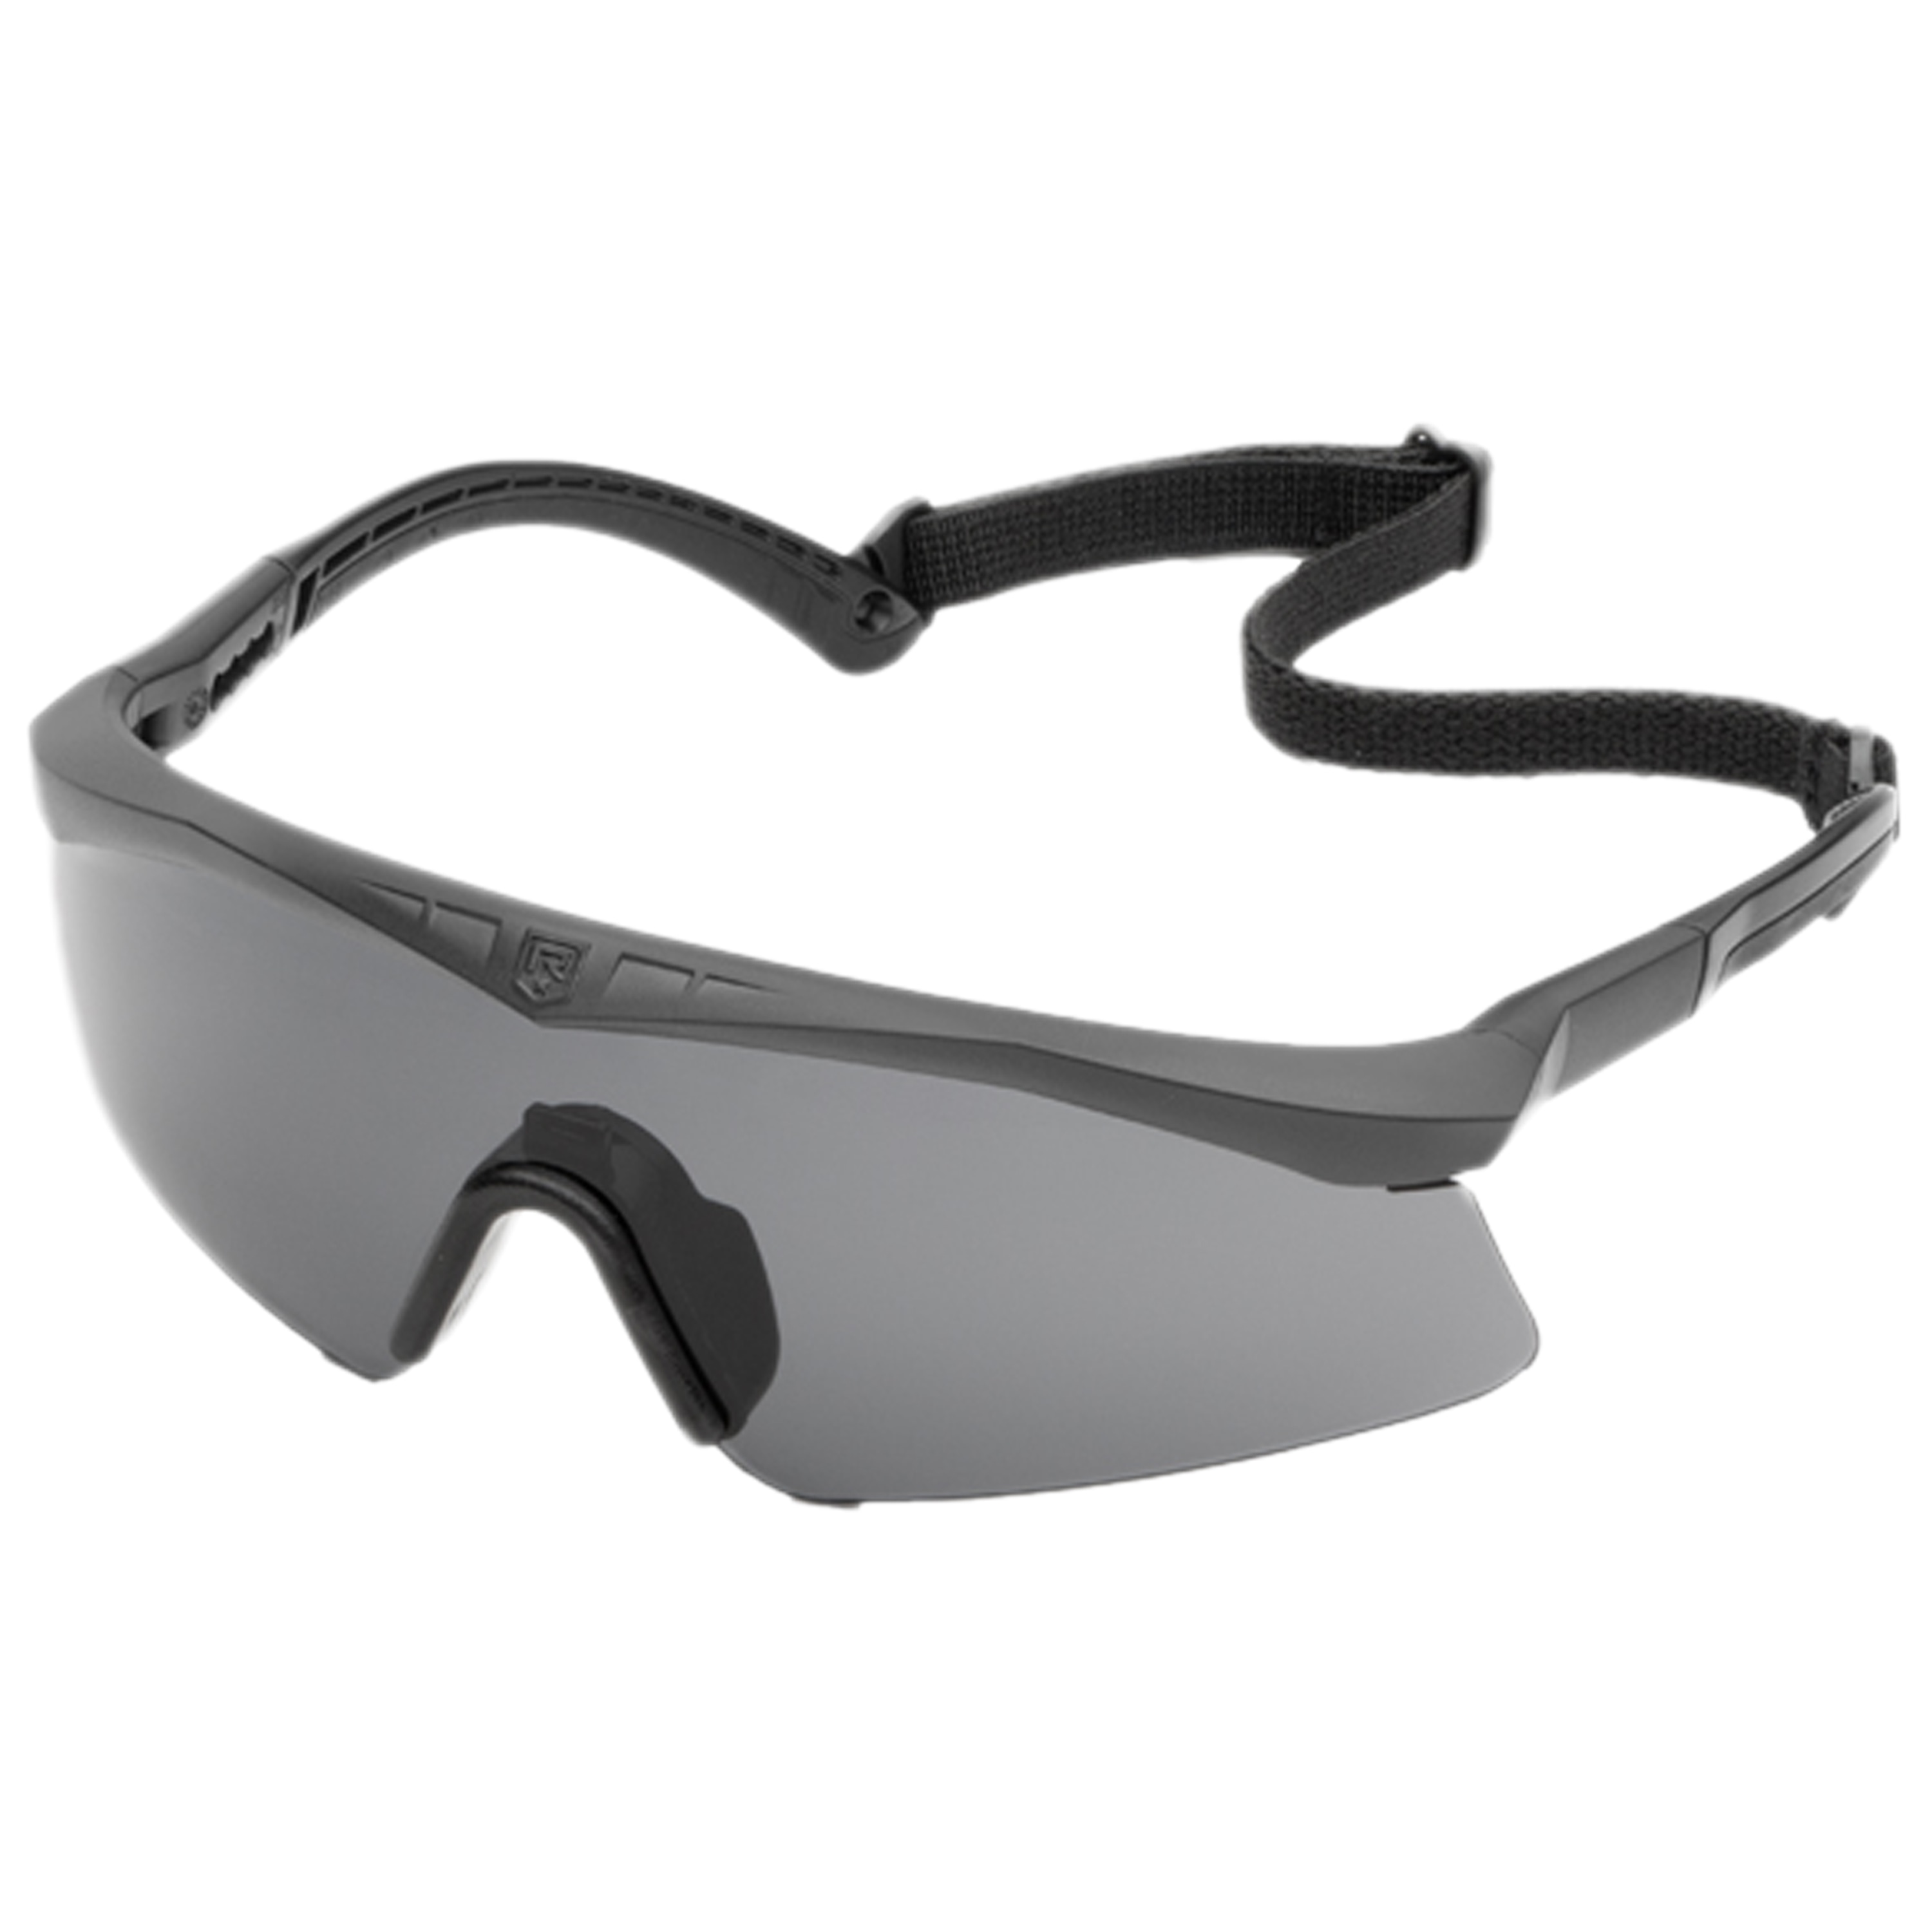 Revision 4-0076-0401 Sawfly Tactical Military Shooting Black Safety Glasses 